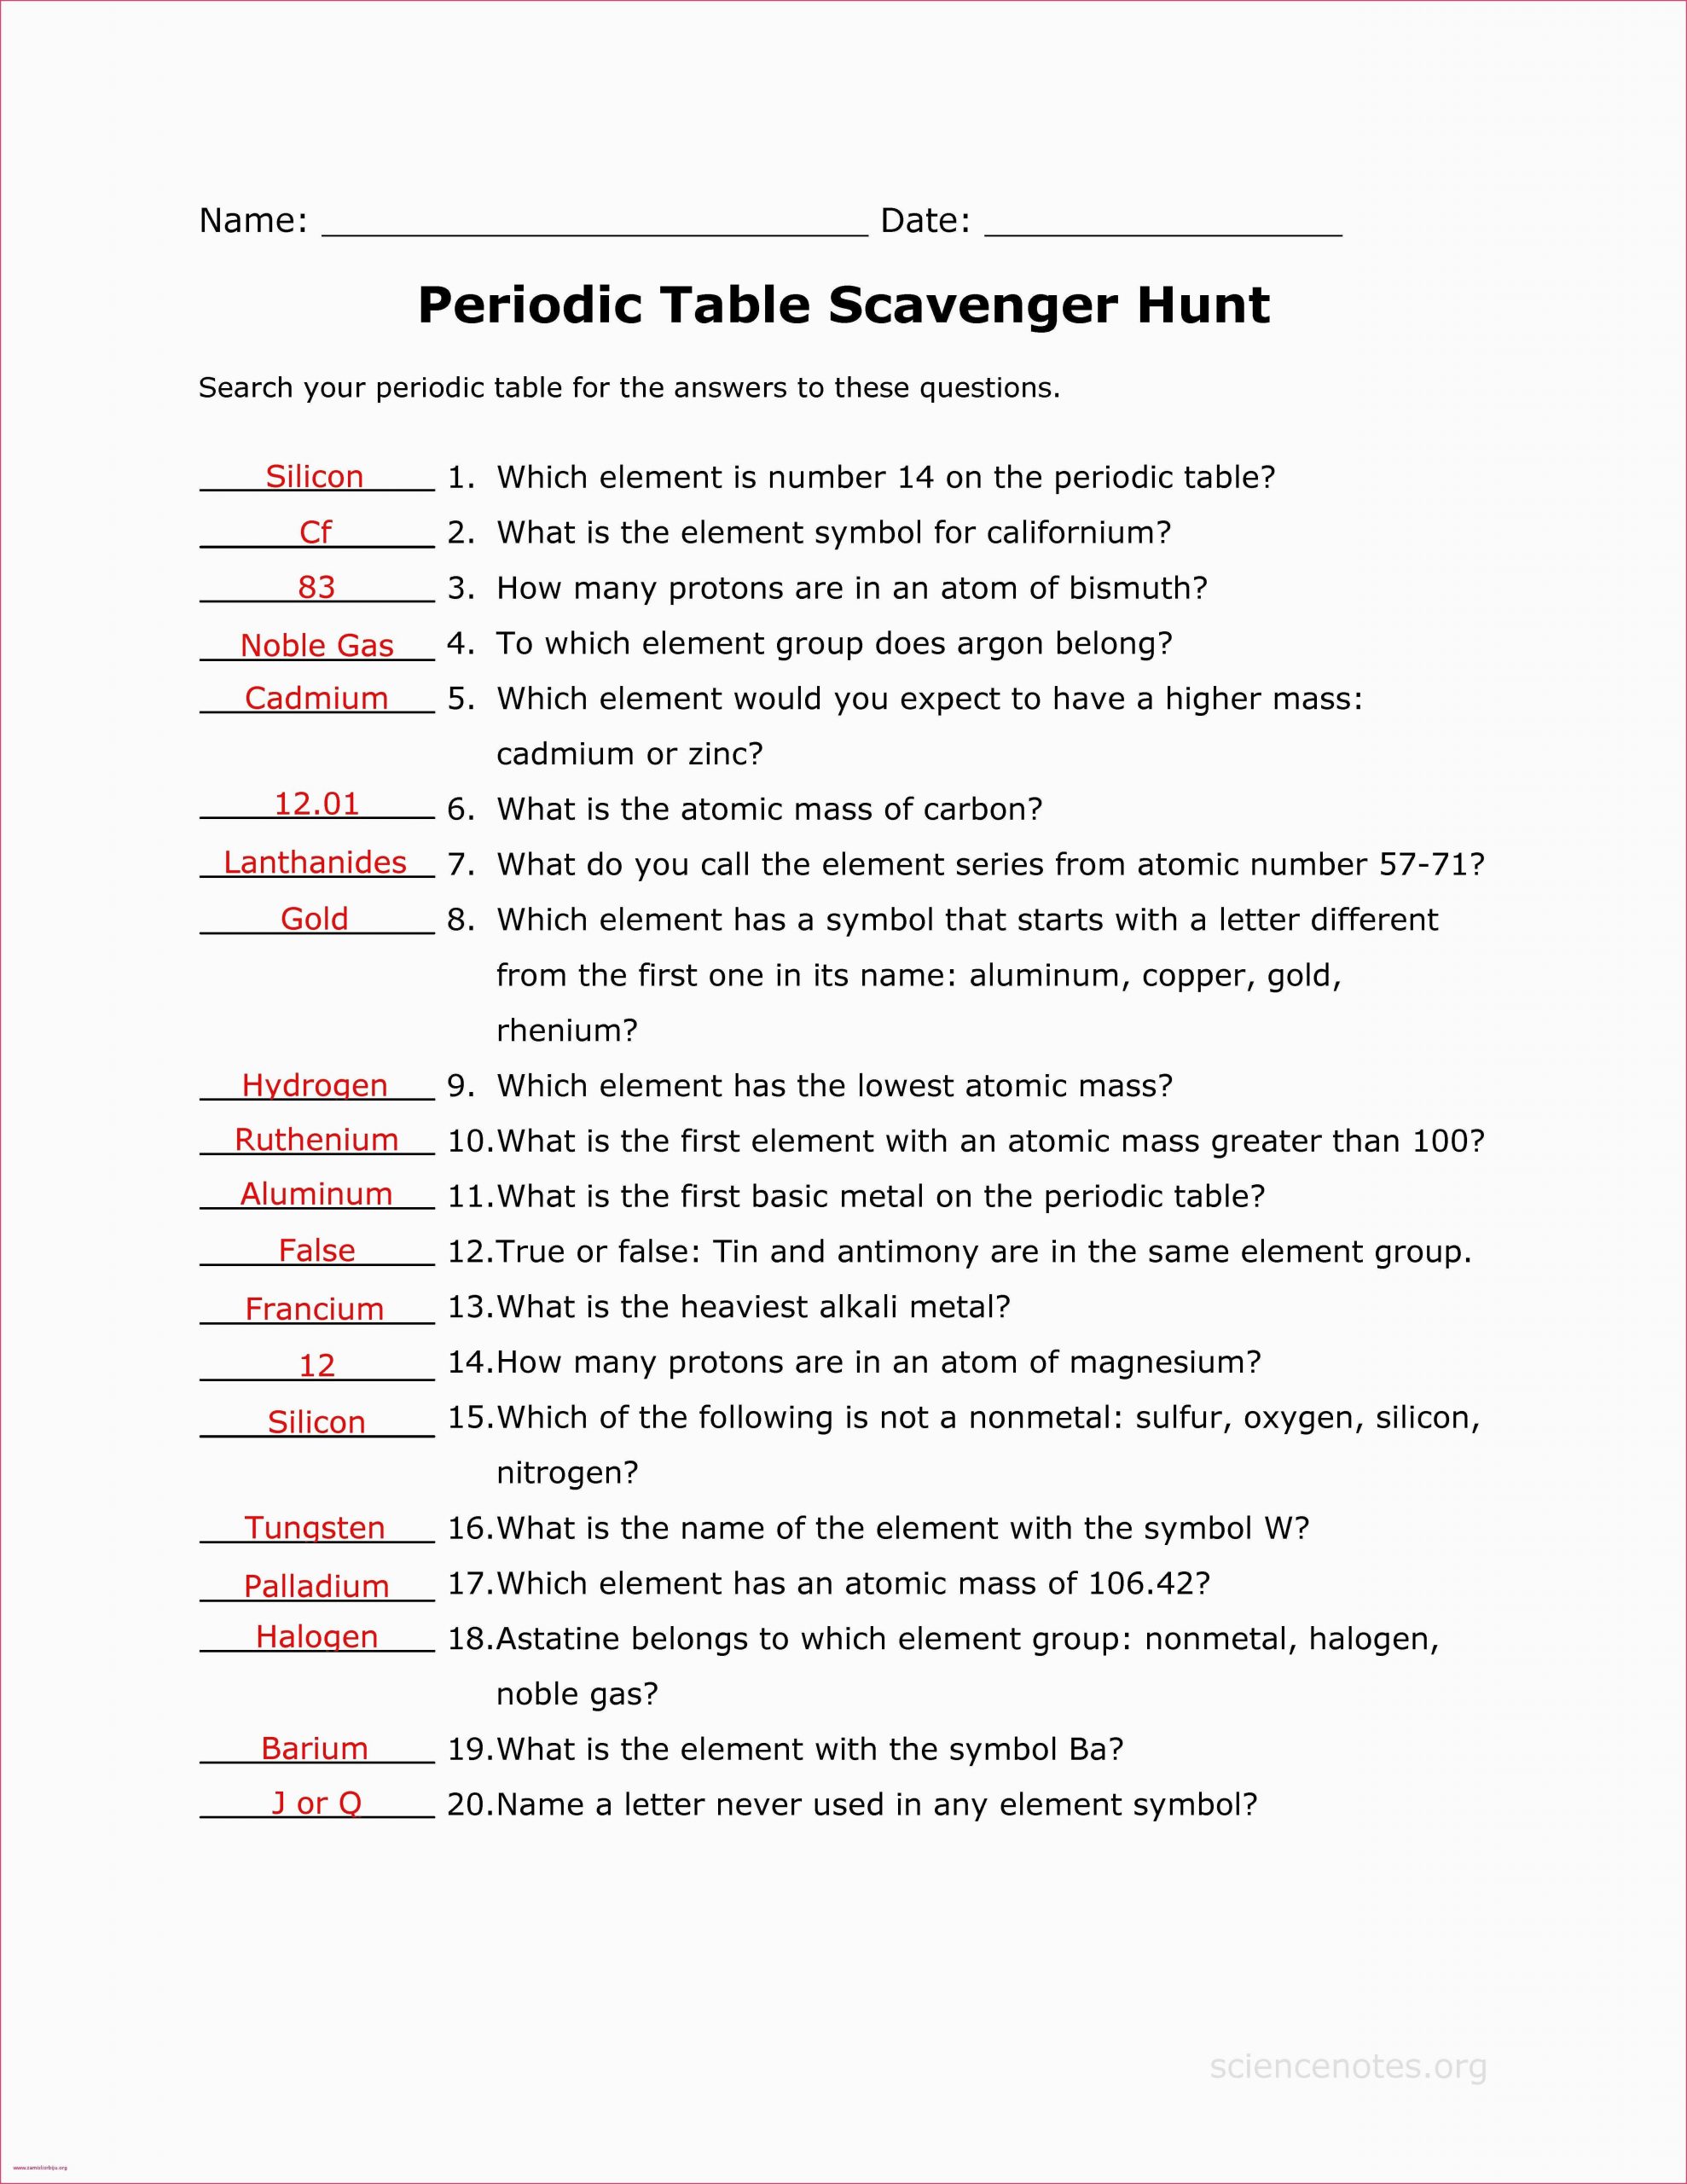 Chemistry Worksheet Matter 1 Answers You Can Download Best Periodic Table with Mass at Here